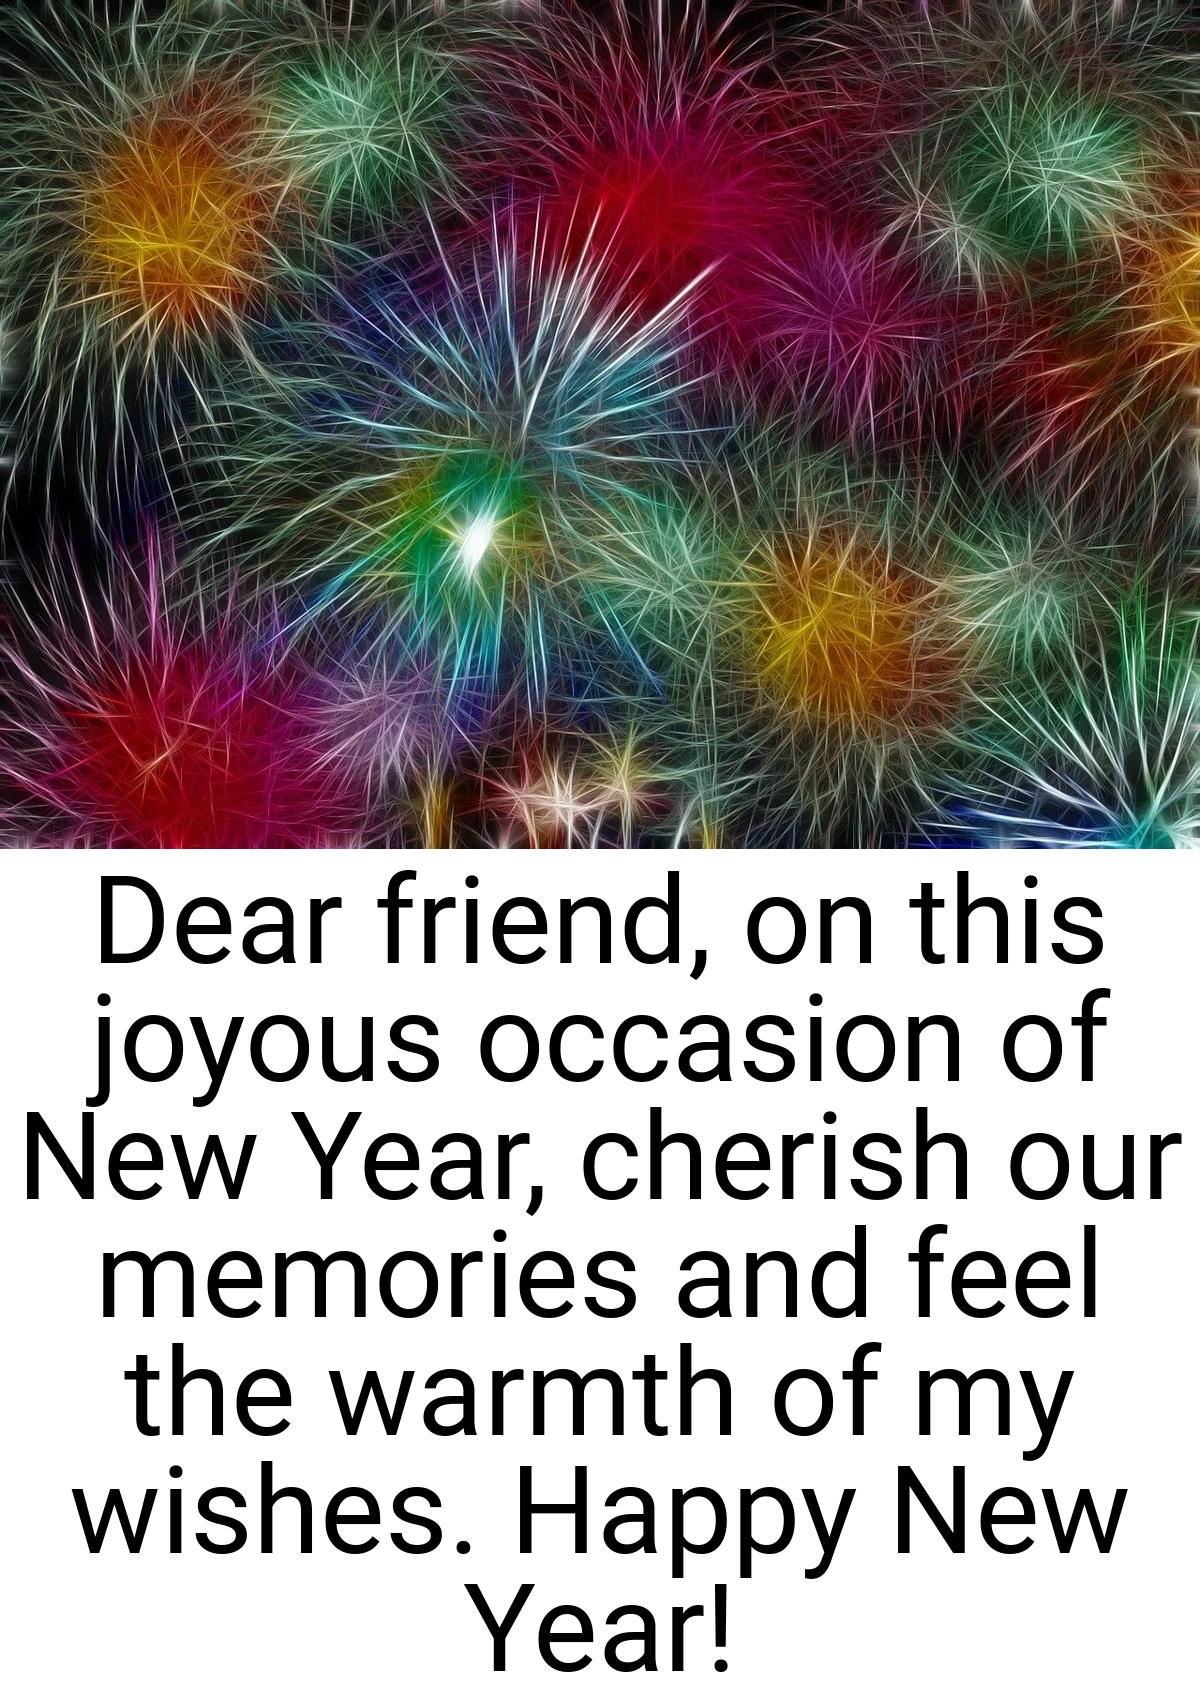 Dear friend, on this joyous occasion of New Year, cherish